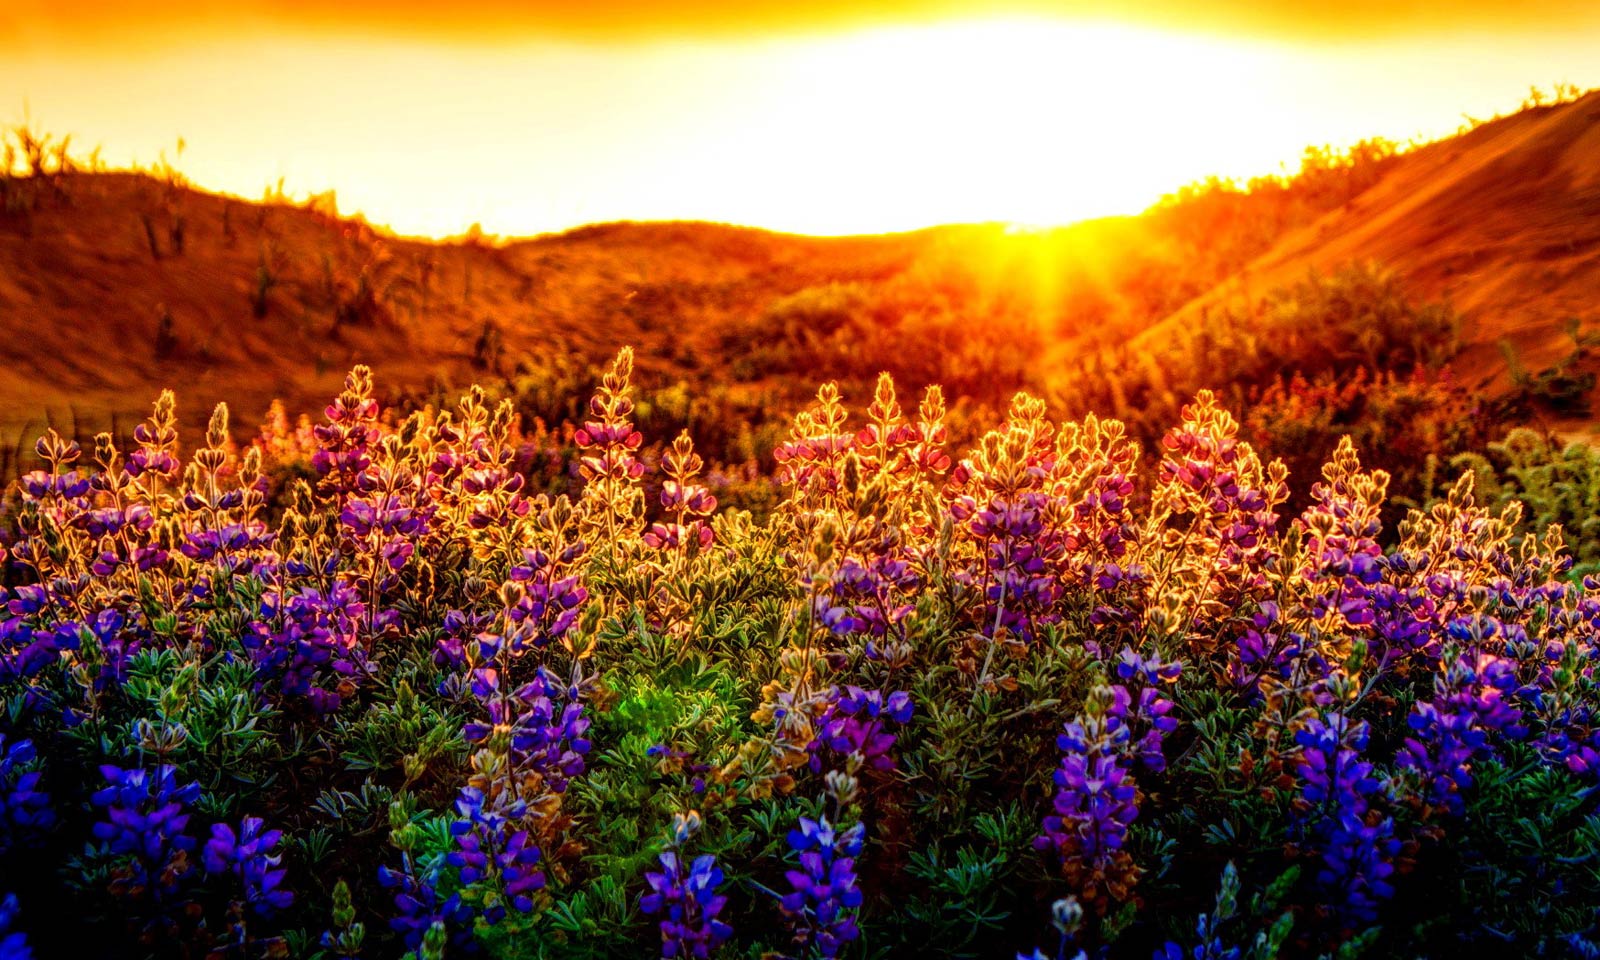 sikring at lege Kunstig SIGALAS HOTEL | sunset-lupines-flowers-nice-summer-nature -glow-beautiful-lovely-rays-meadow-sundown-lupine-field-pretty-dazzling-wallpaper-photo